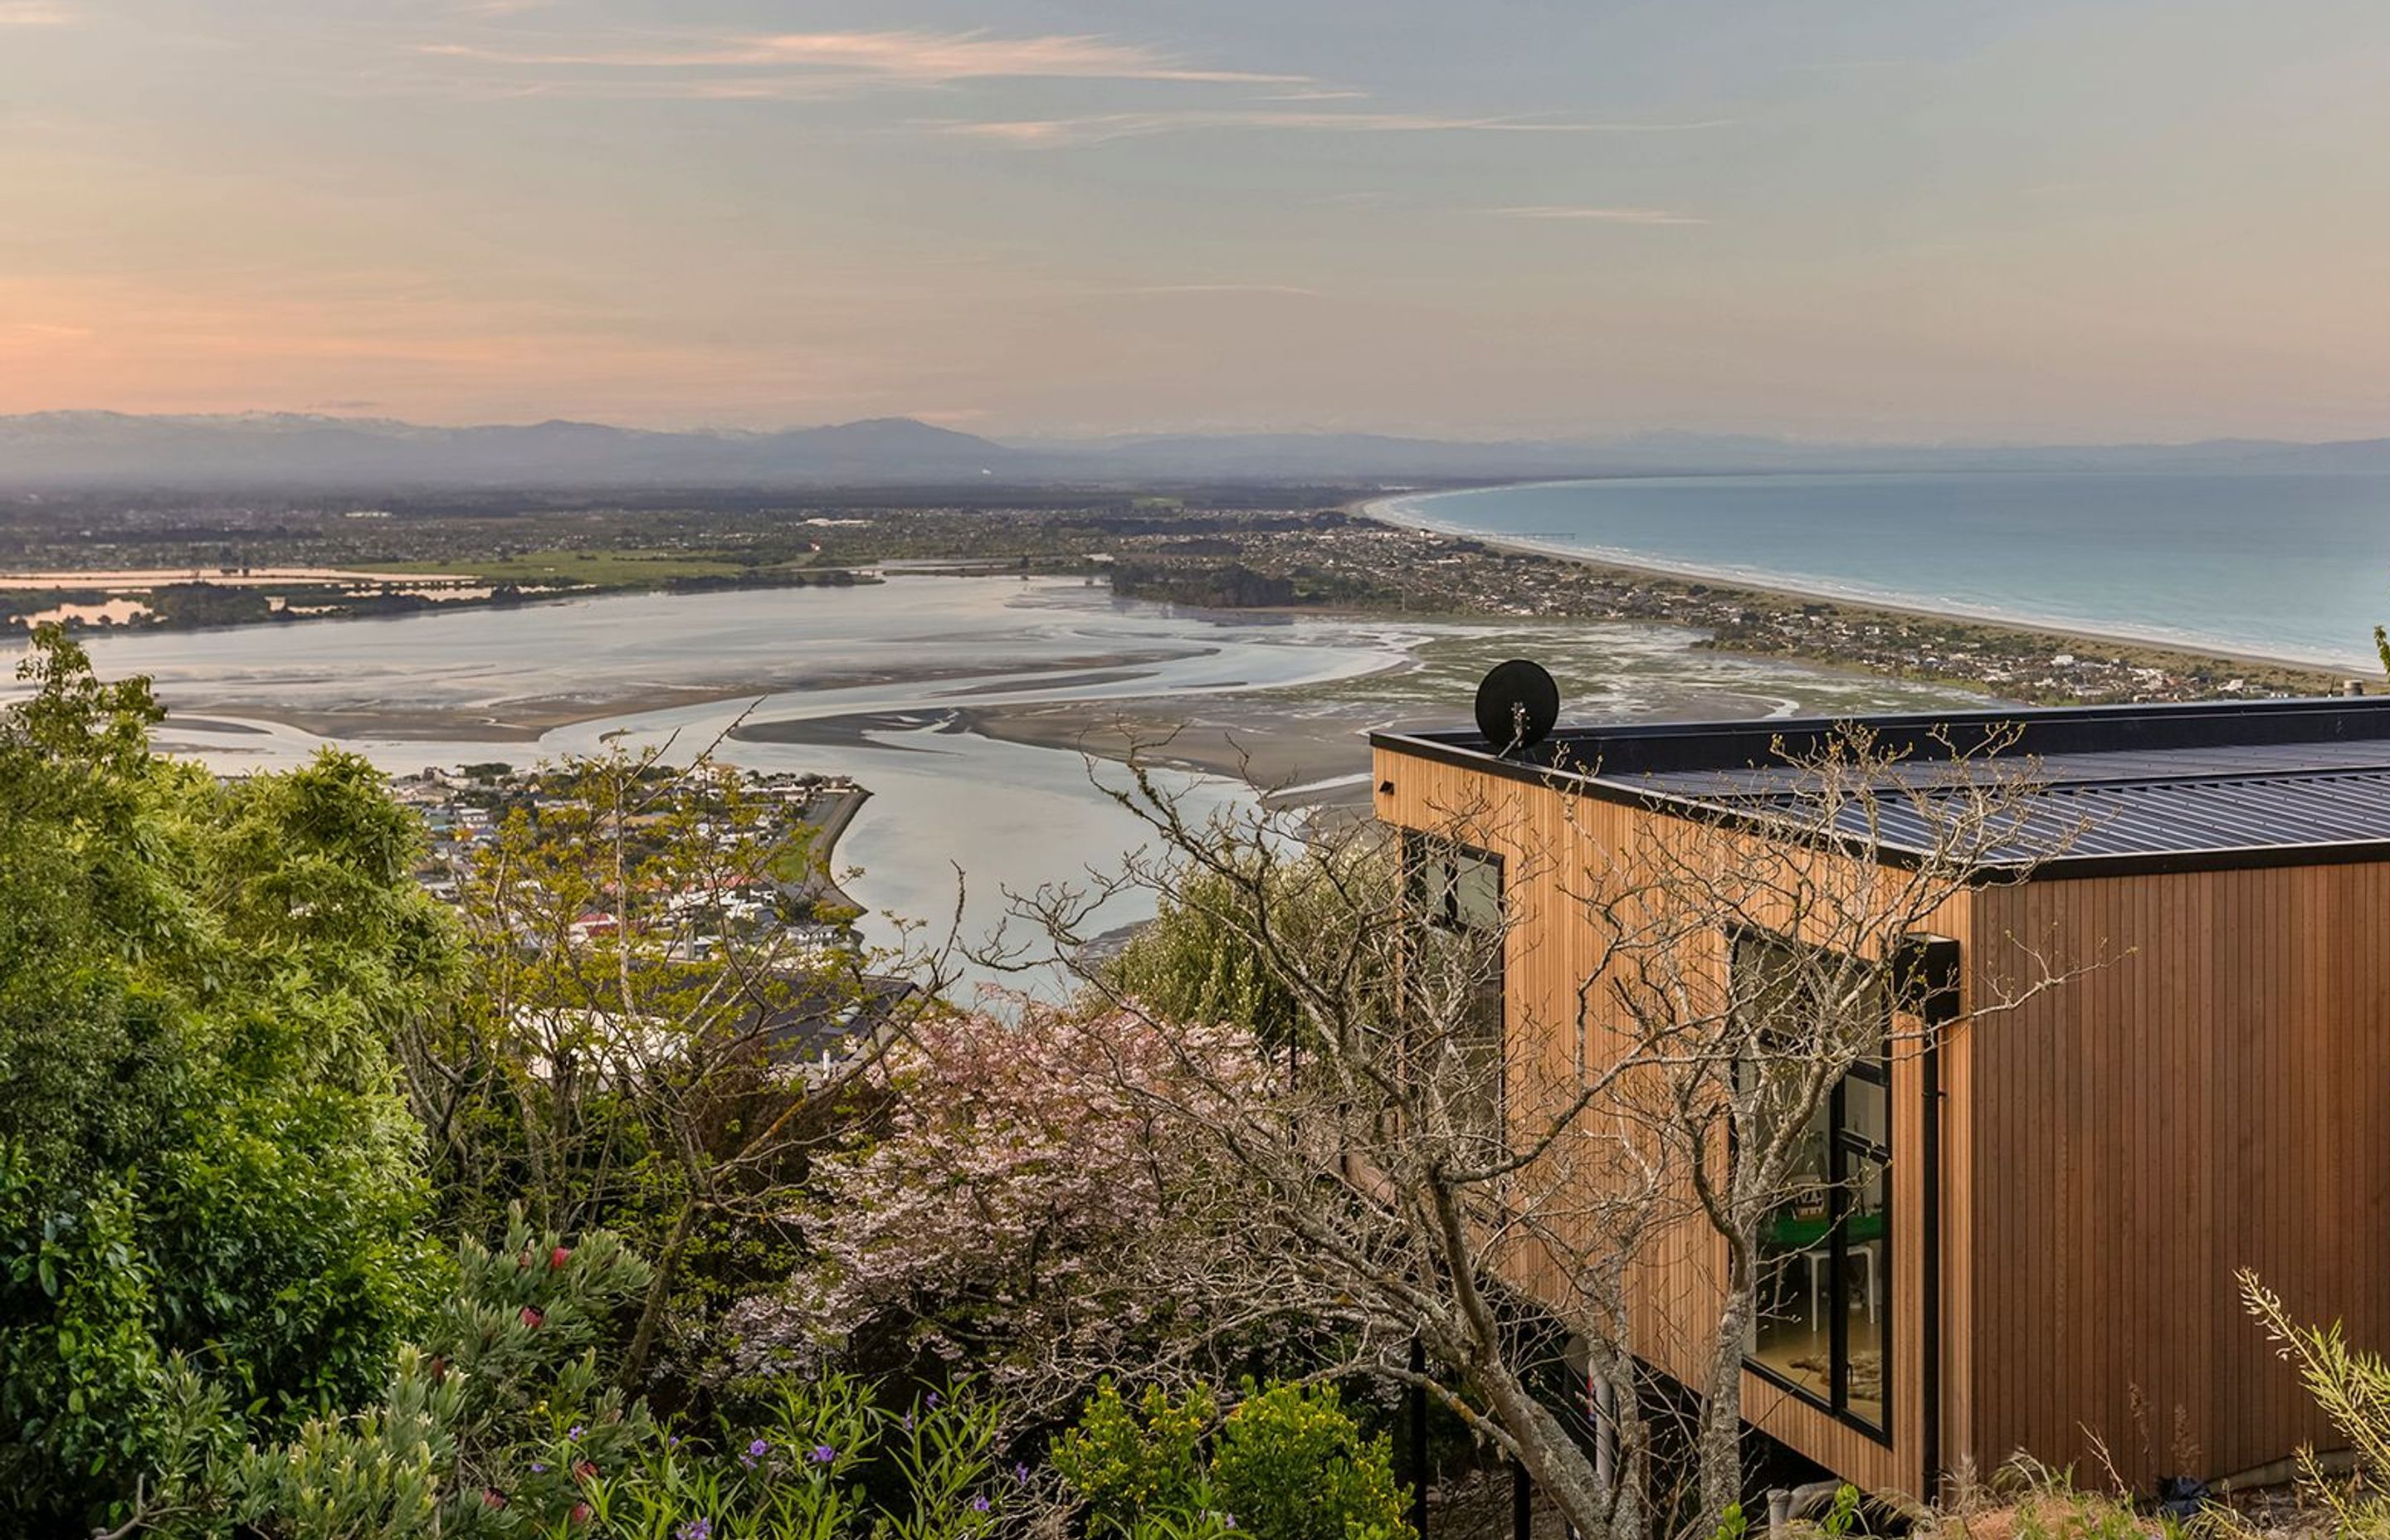 Jack House enjoys a north-facing aspect, ensuring it captures the all-day sun and the outstanding views of the ocean and the surrounding landscape